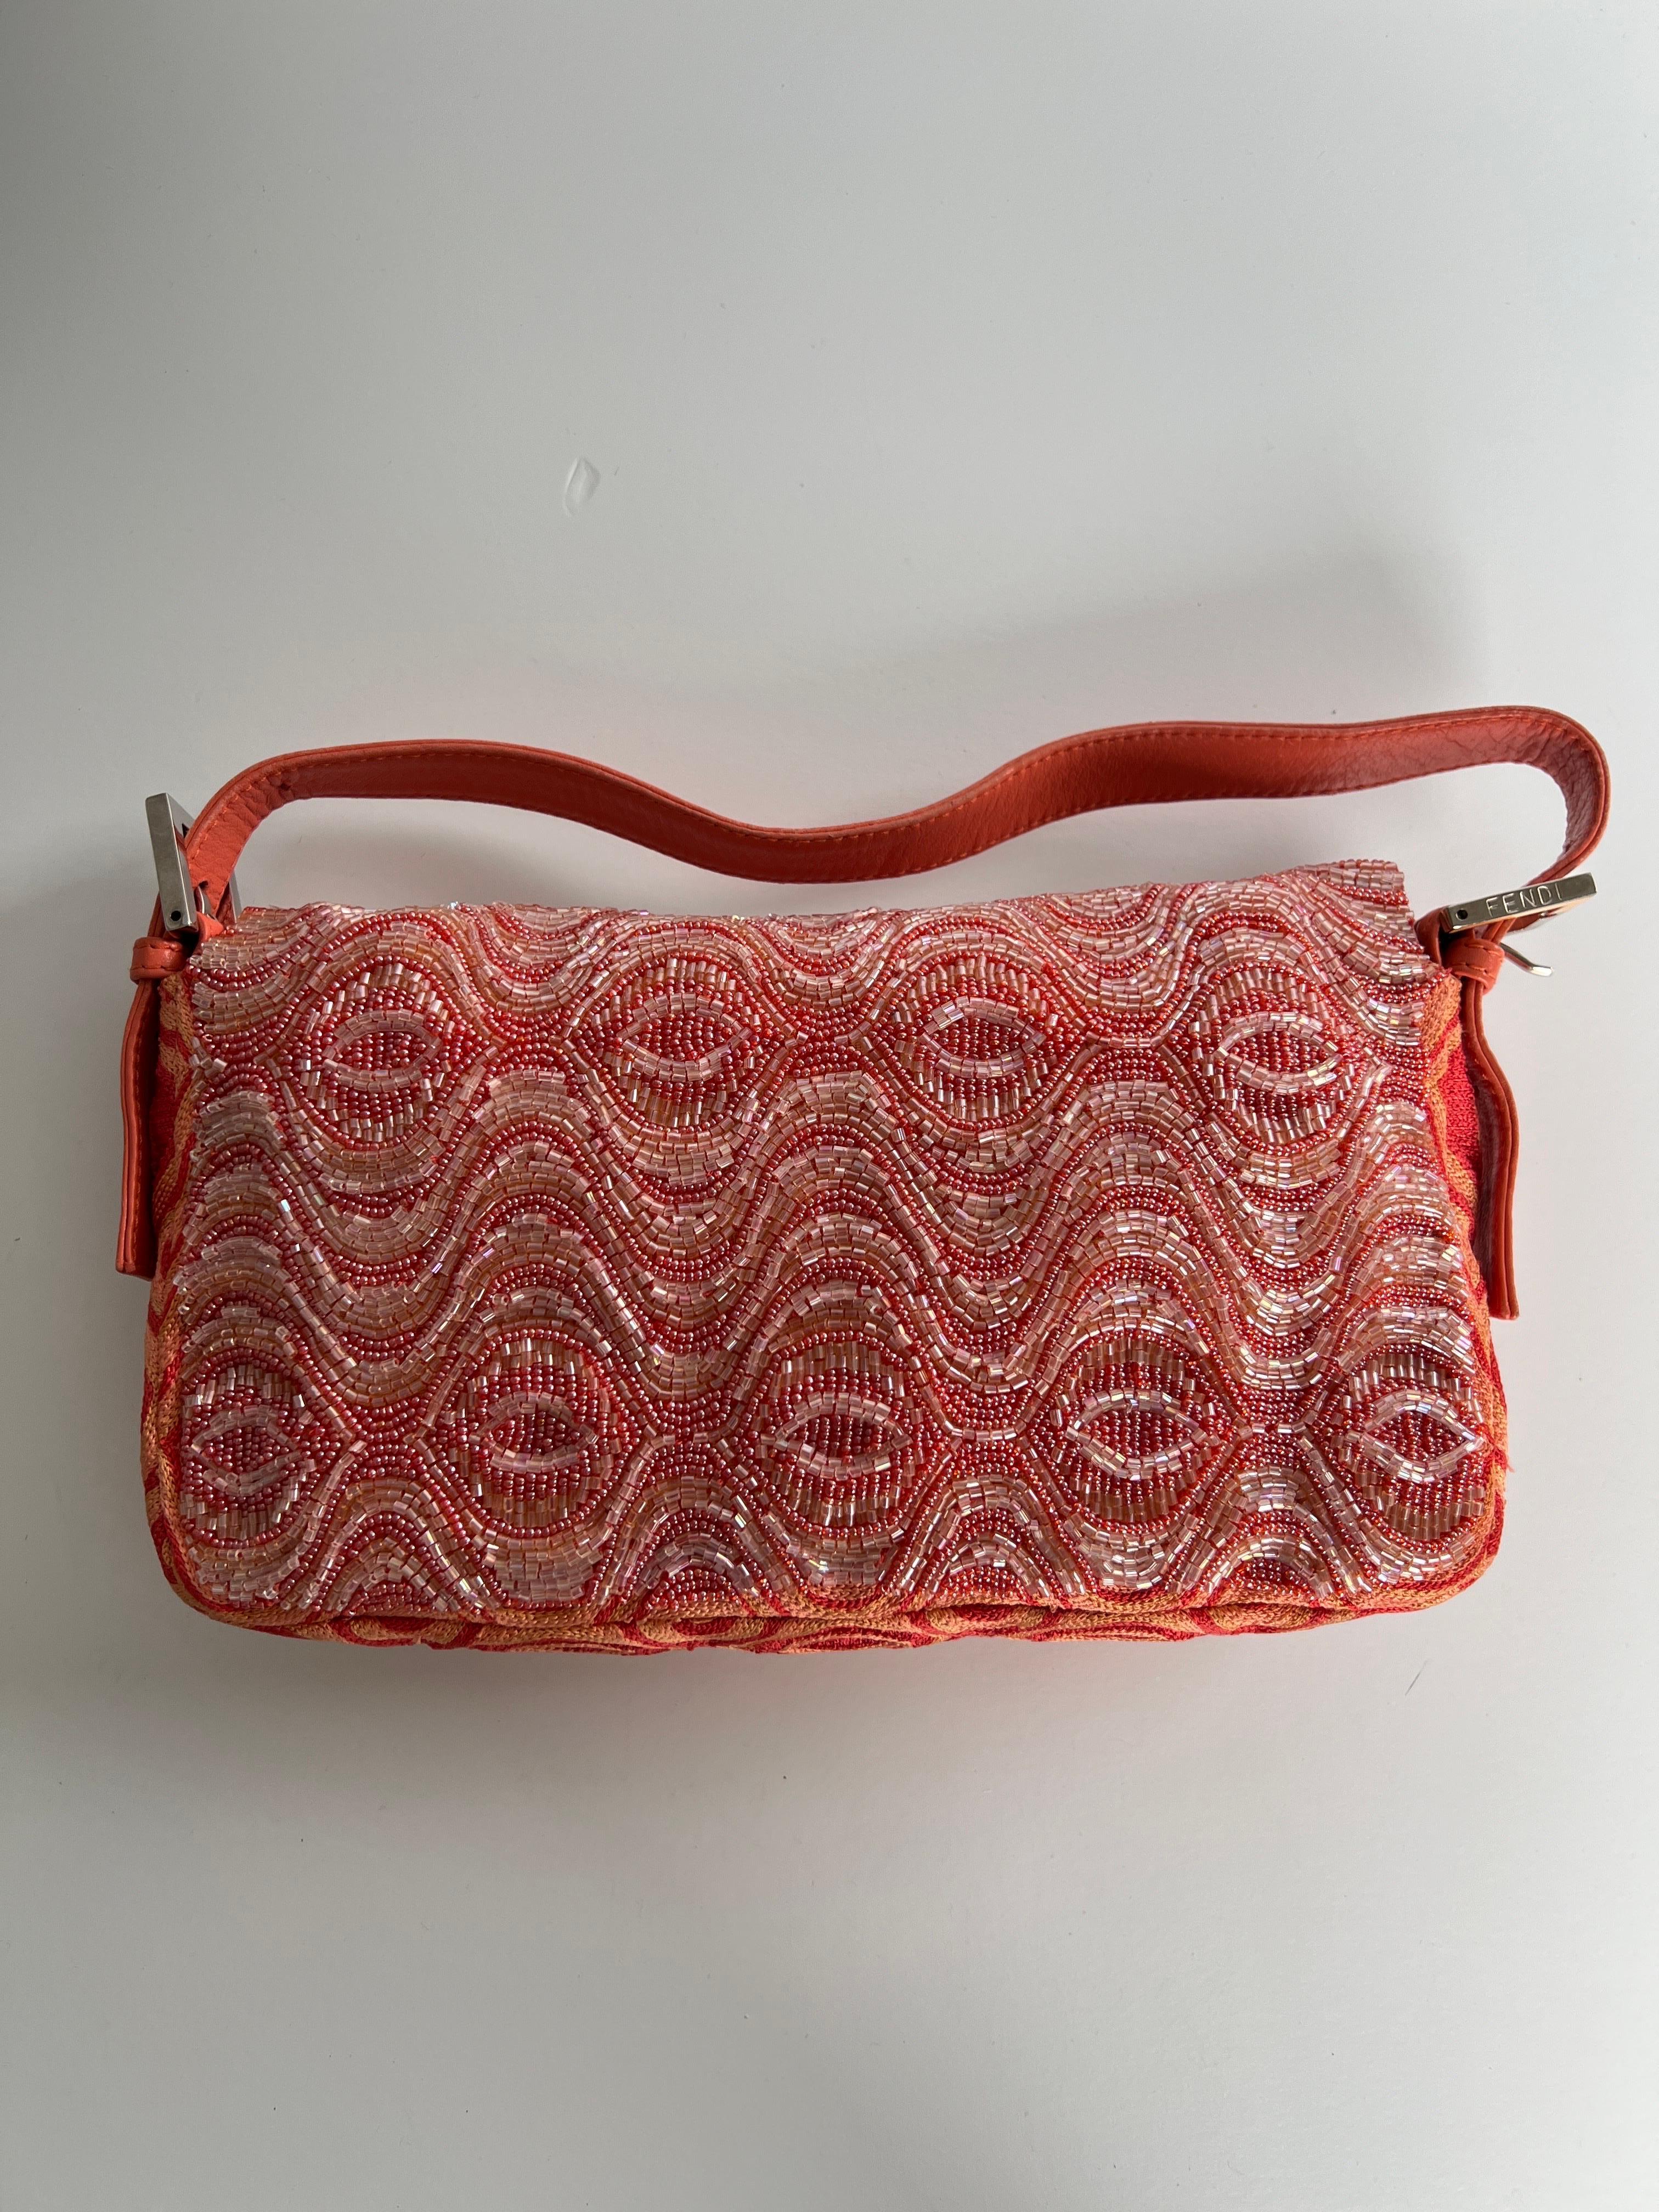 Vintage Fendi orange waved pattern beaded baguette In Good Condition For Sale In Aurora, IL